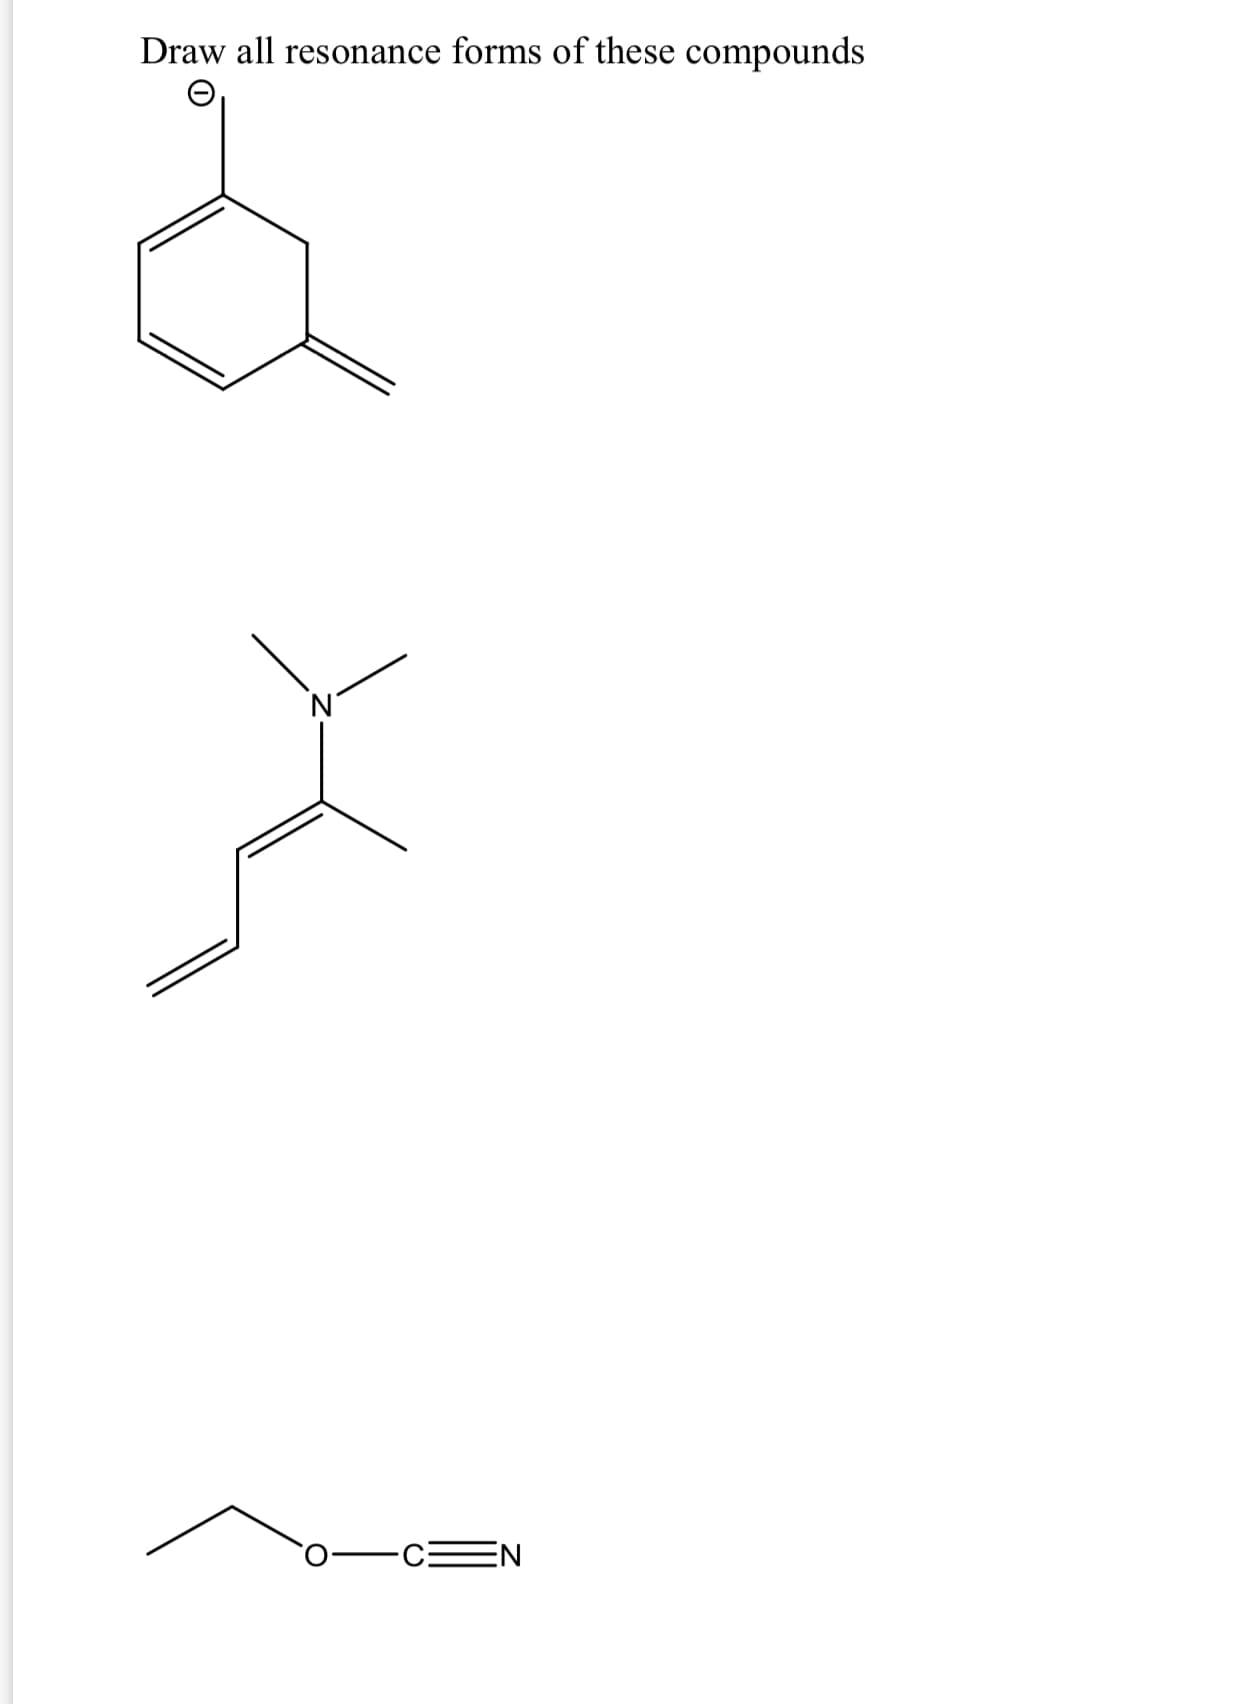 Draw all resonance forms of these compounds
N
